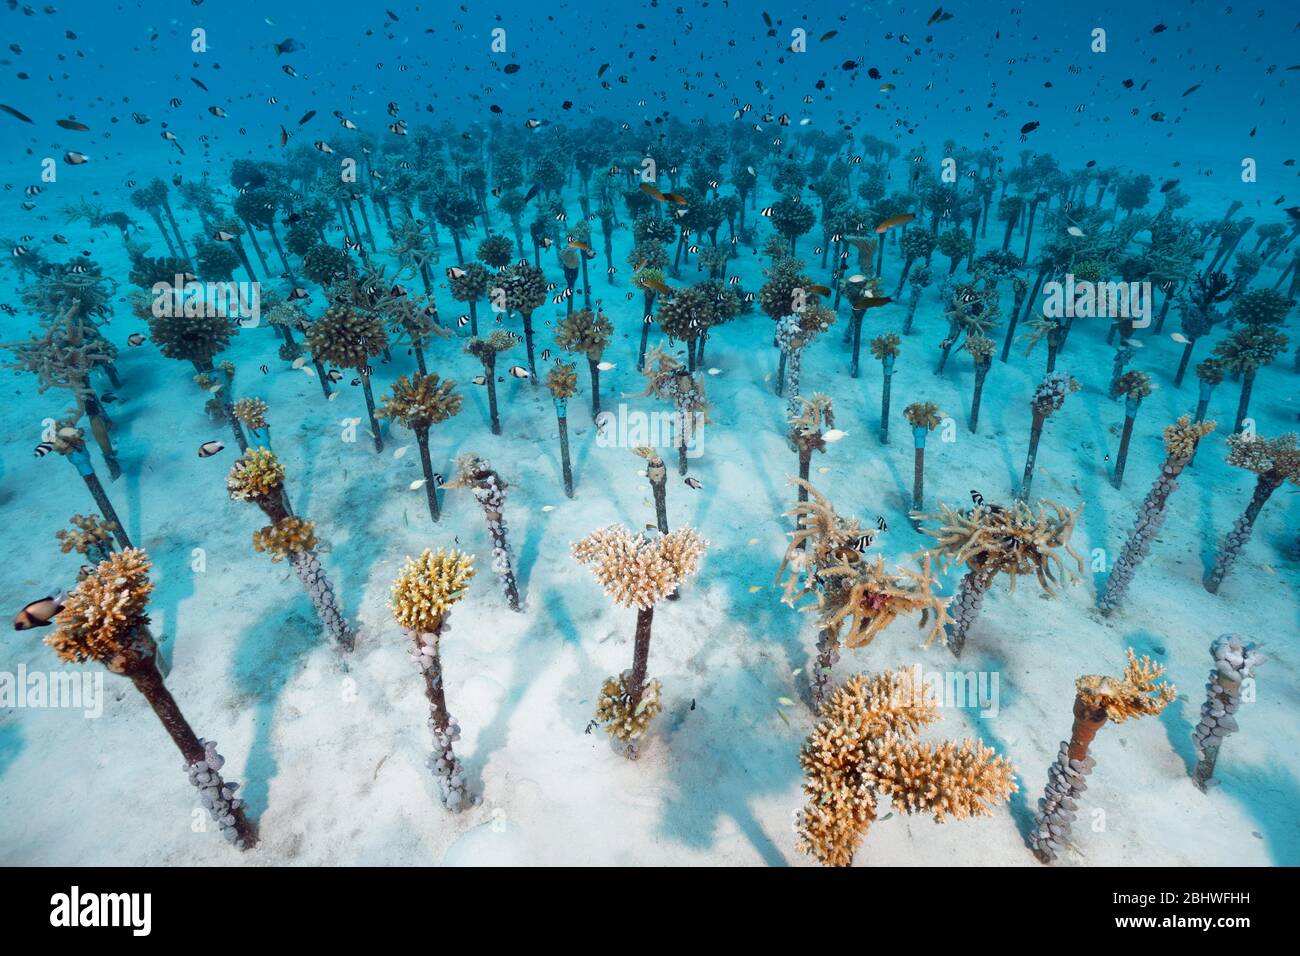 Coral breeding of hard corals (Sleractinia) on metal tubes, shoal of different Damselfish (Pomacentridae), house reef Summer Island, Indian Ocean Stock Photo